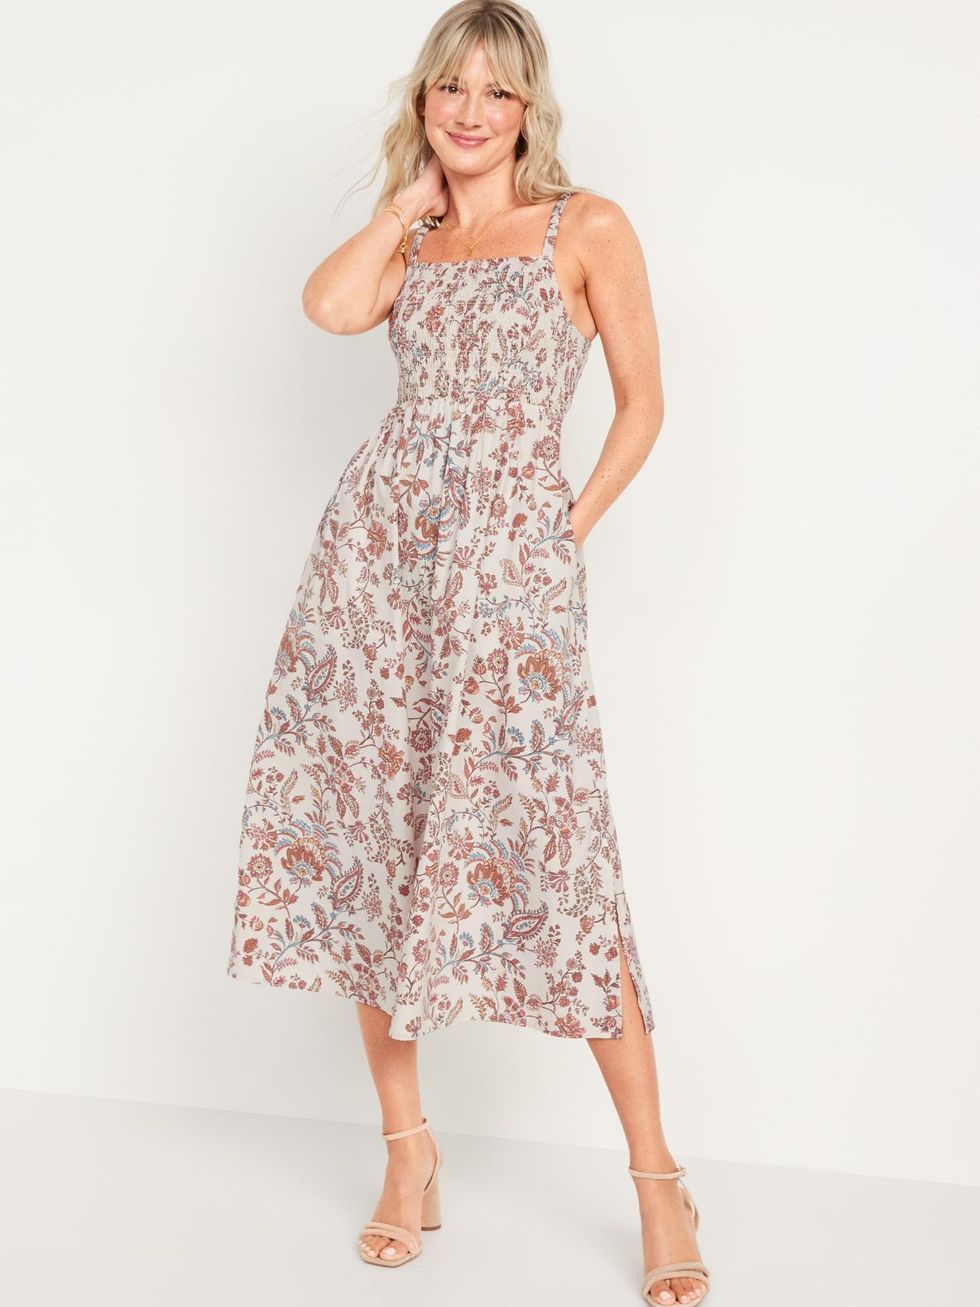 floral summer sundress from old navy